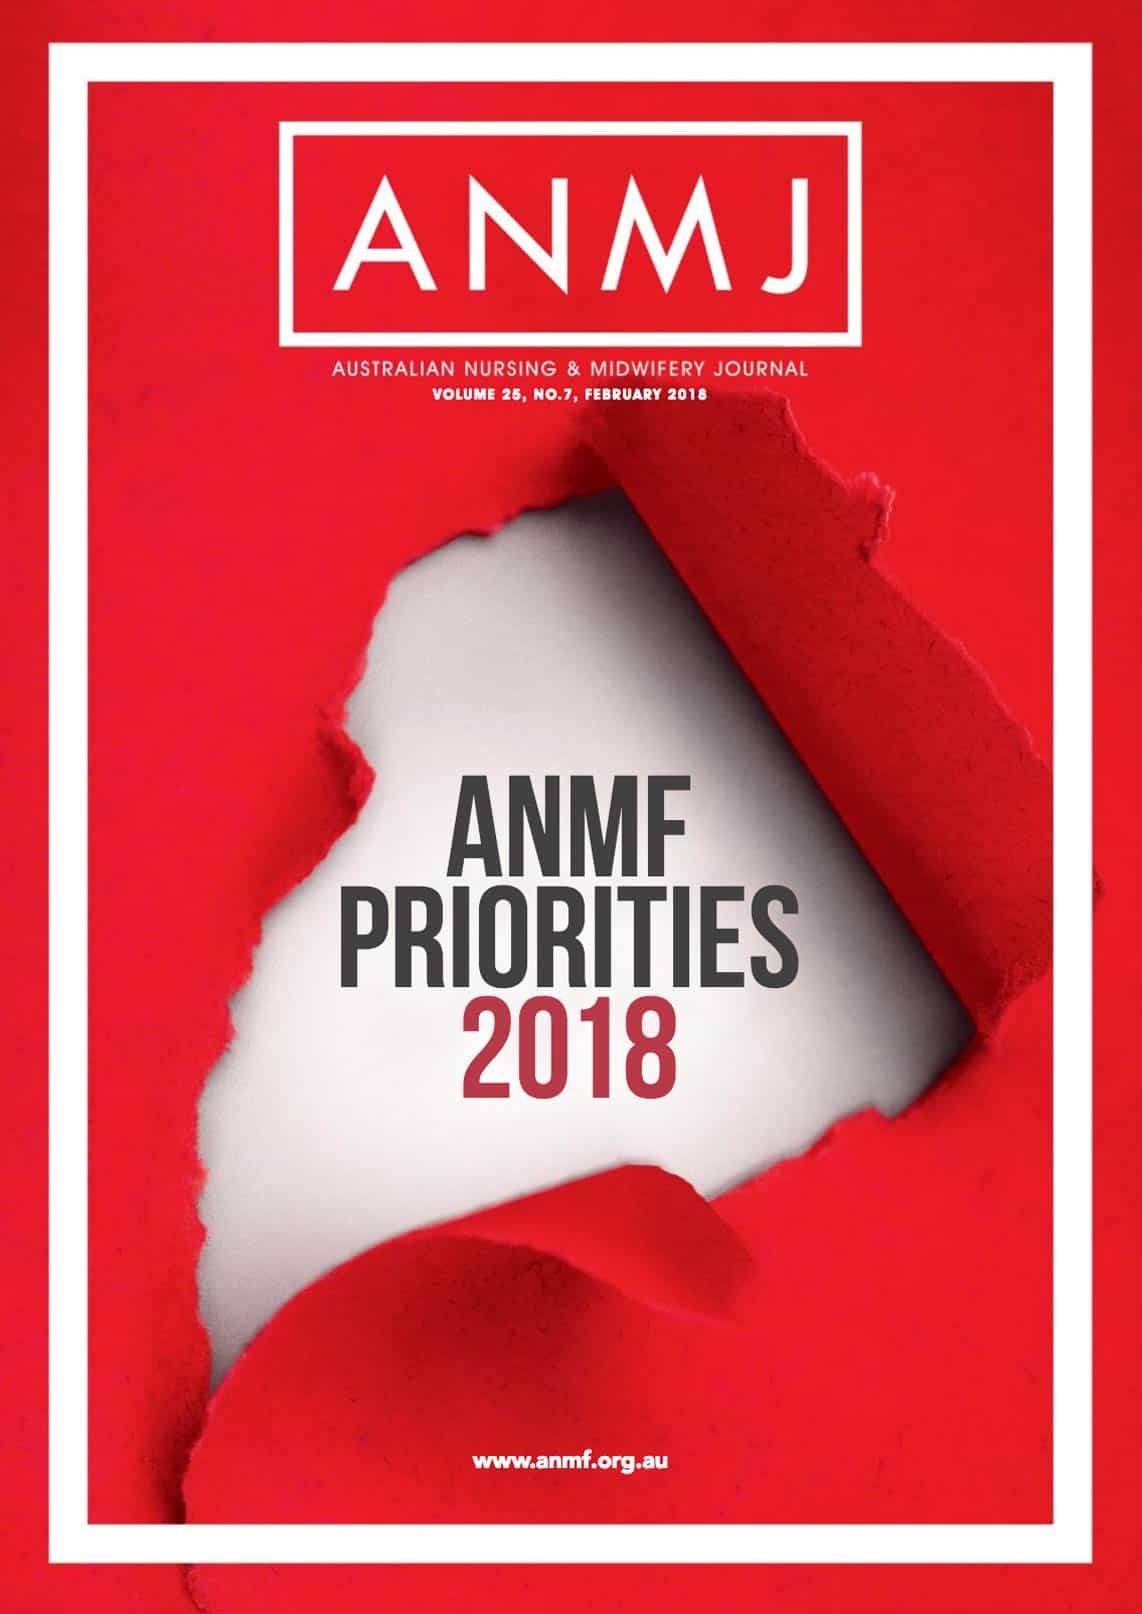 ANMJ February 2018 Issue